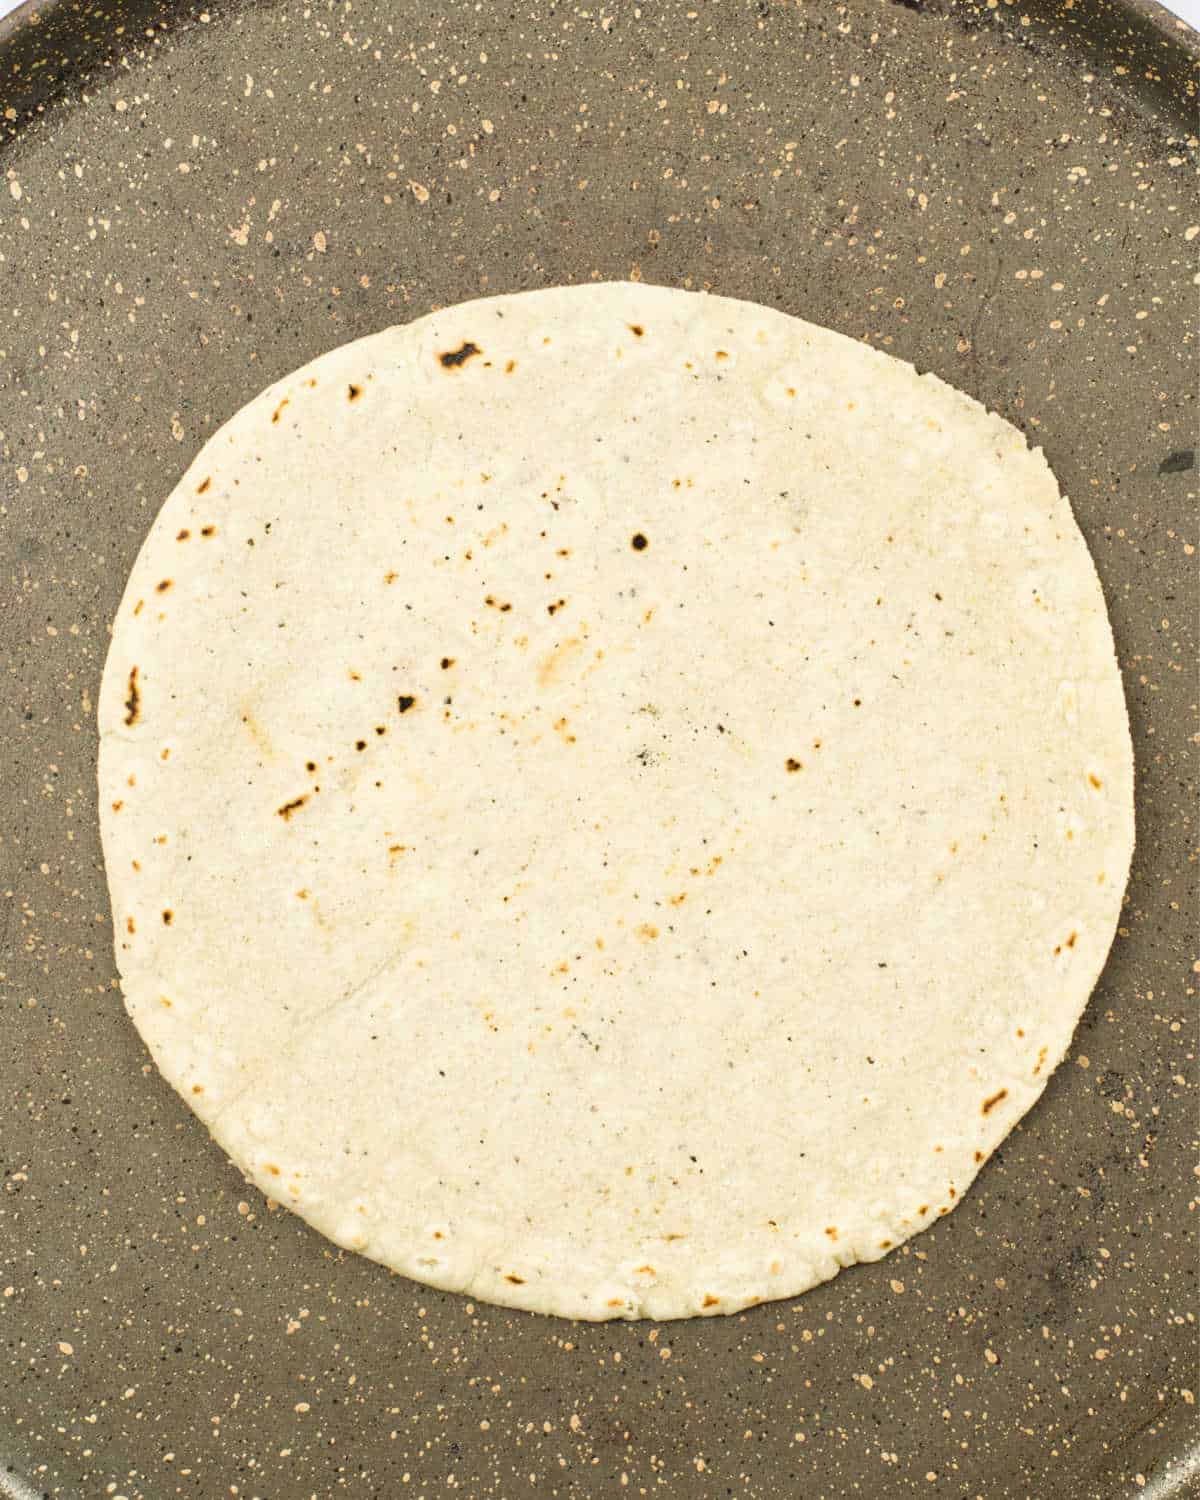 Dark griddle with corn tortilla cooking. Top close up view.